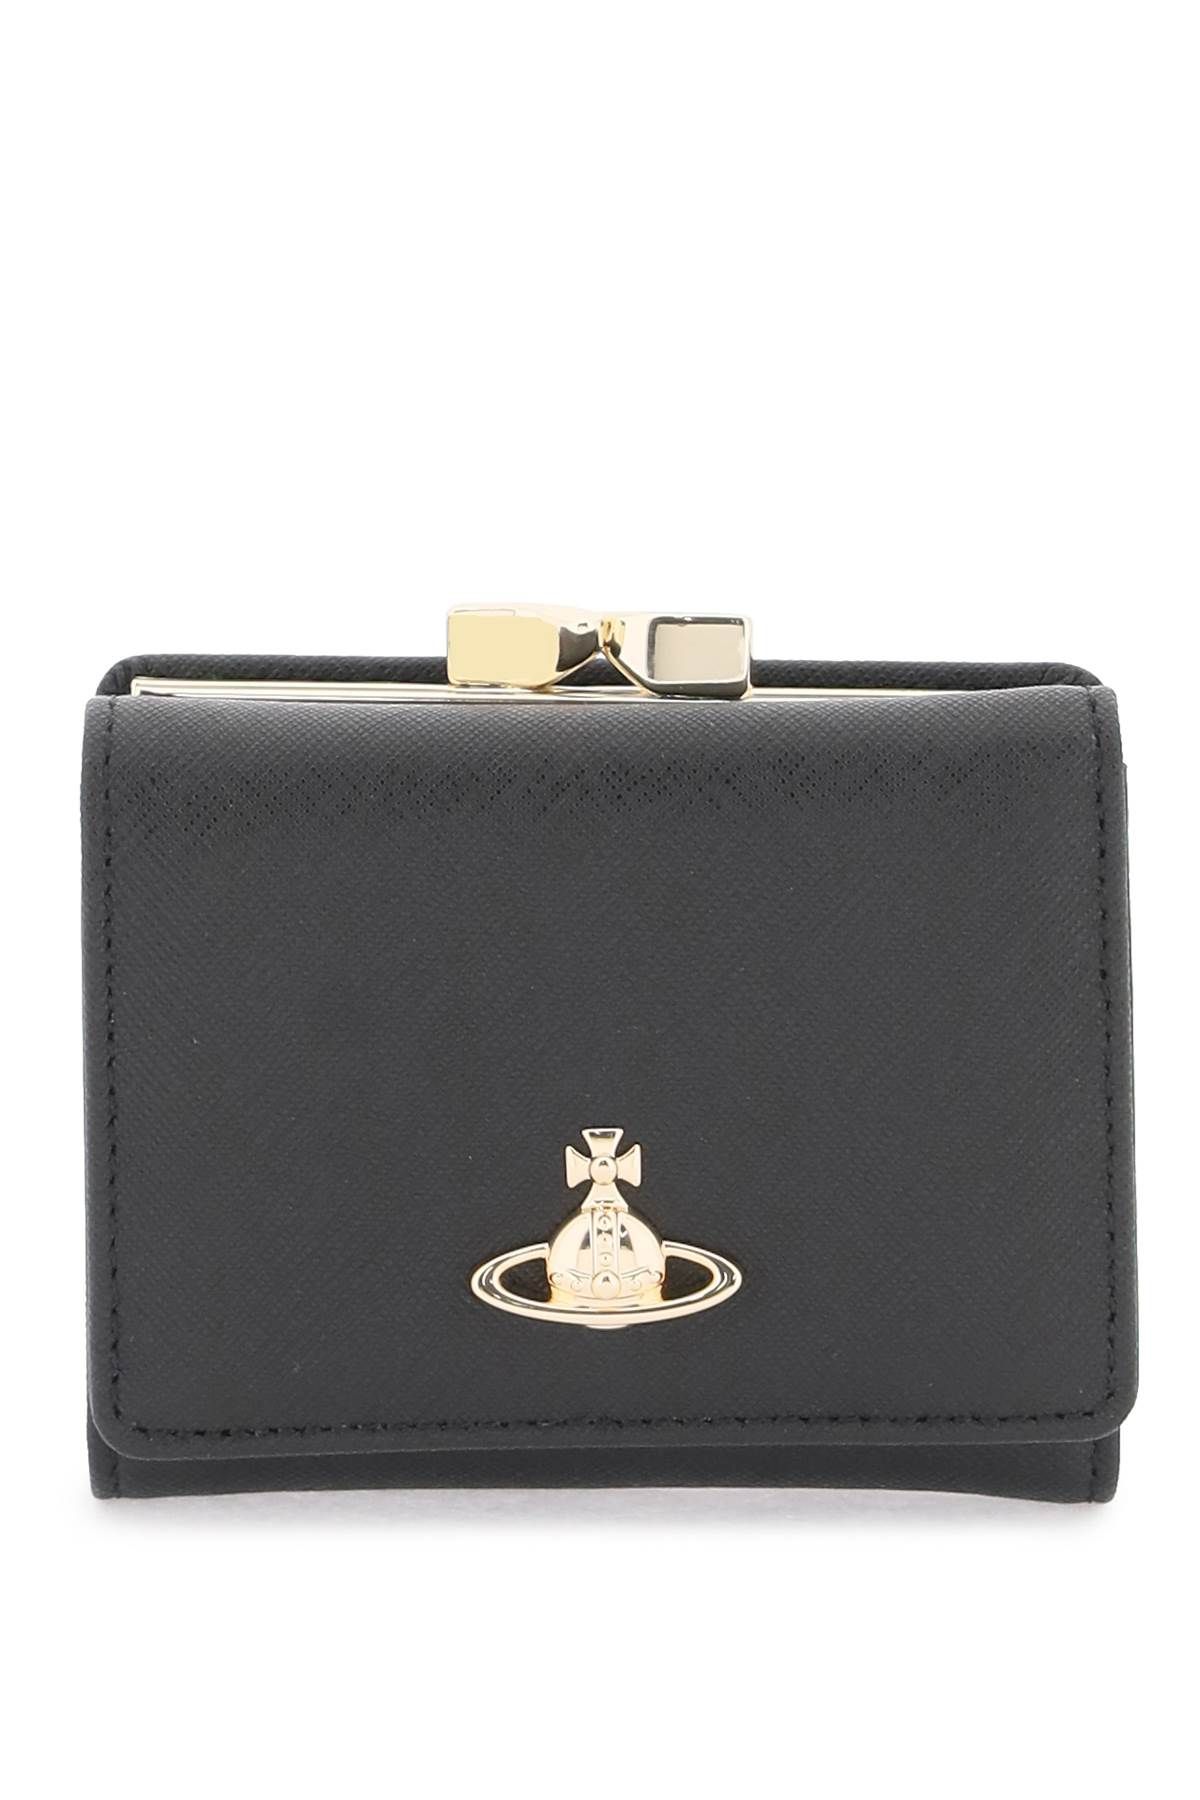 VIVIENNE WESTWOOD small frame saffiano wallet